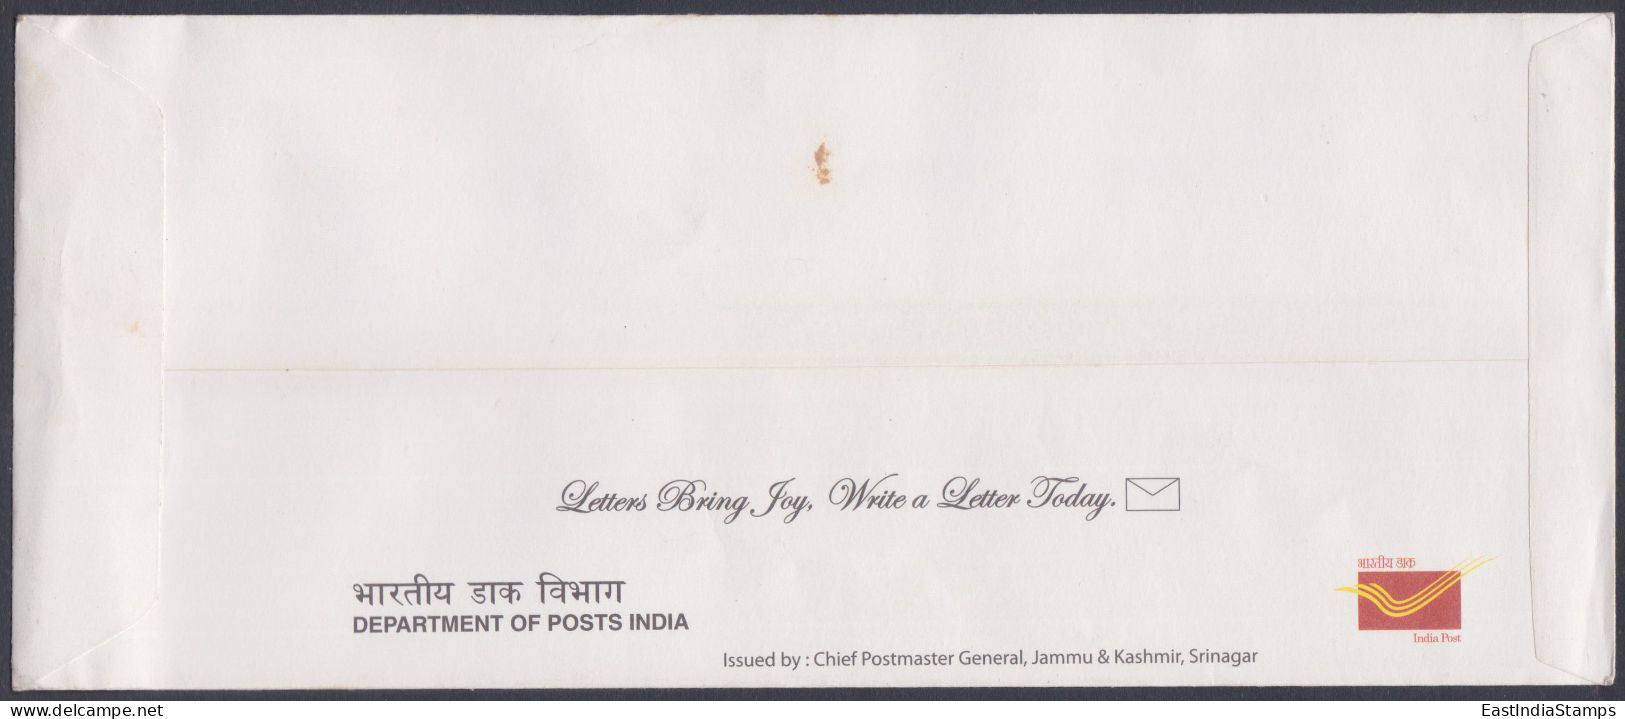 Inde India 2011 Special Cover SKICC, Srinagar, International Conference Centre, Mountain, Lake, Pictorial Postmark - Lettres & Documents